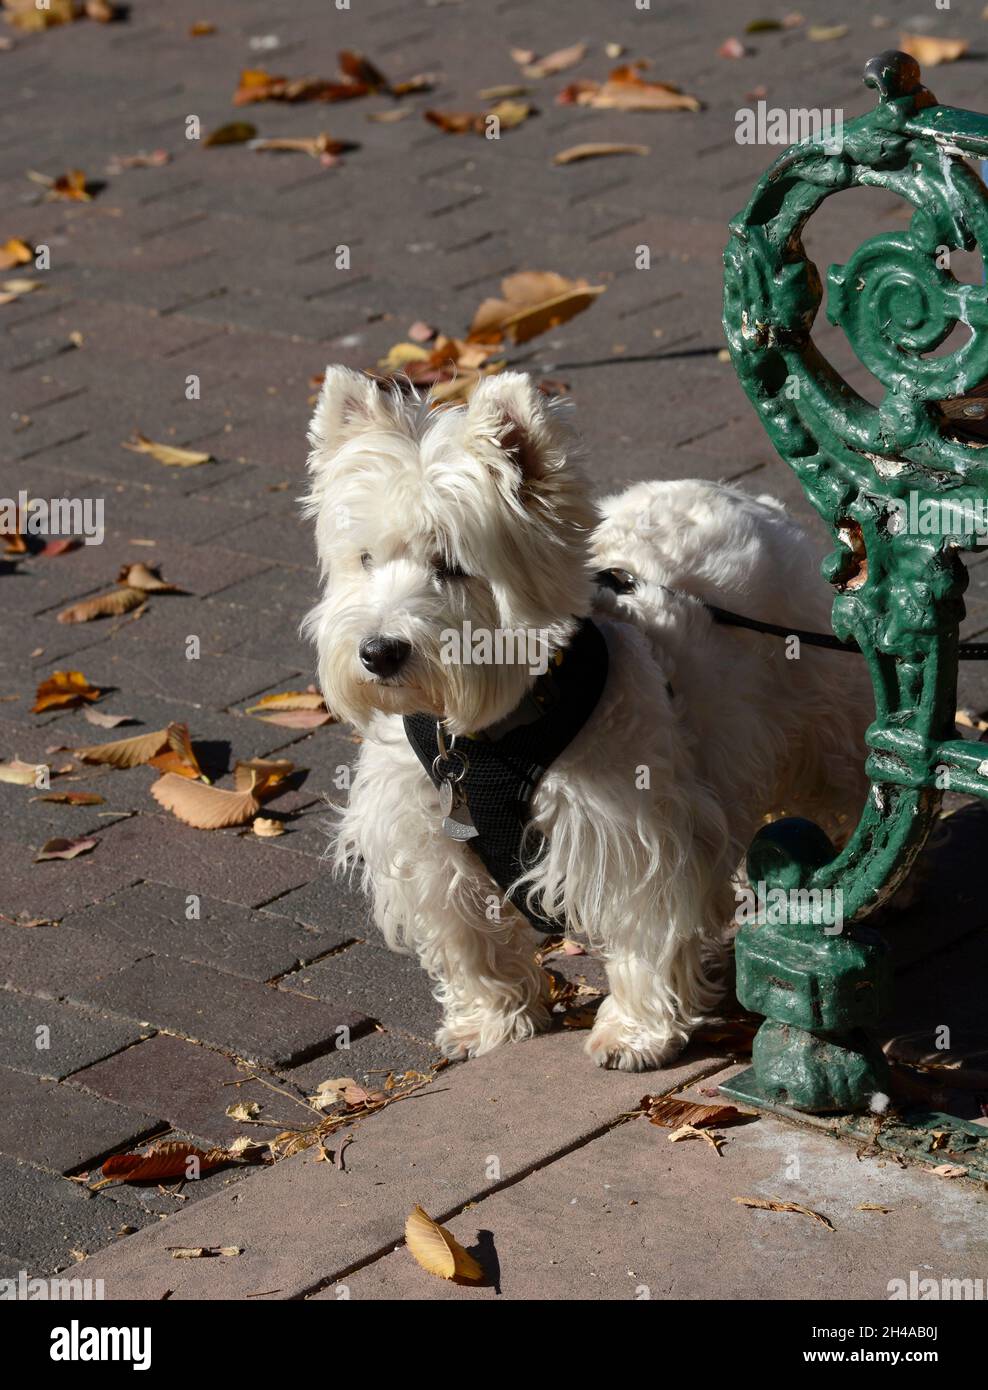 A West Highland White Terrier stands beside its owner sitting an a park bench in Santa Fe, New Mexico. Stock Photo